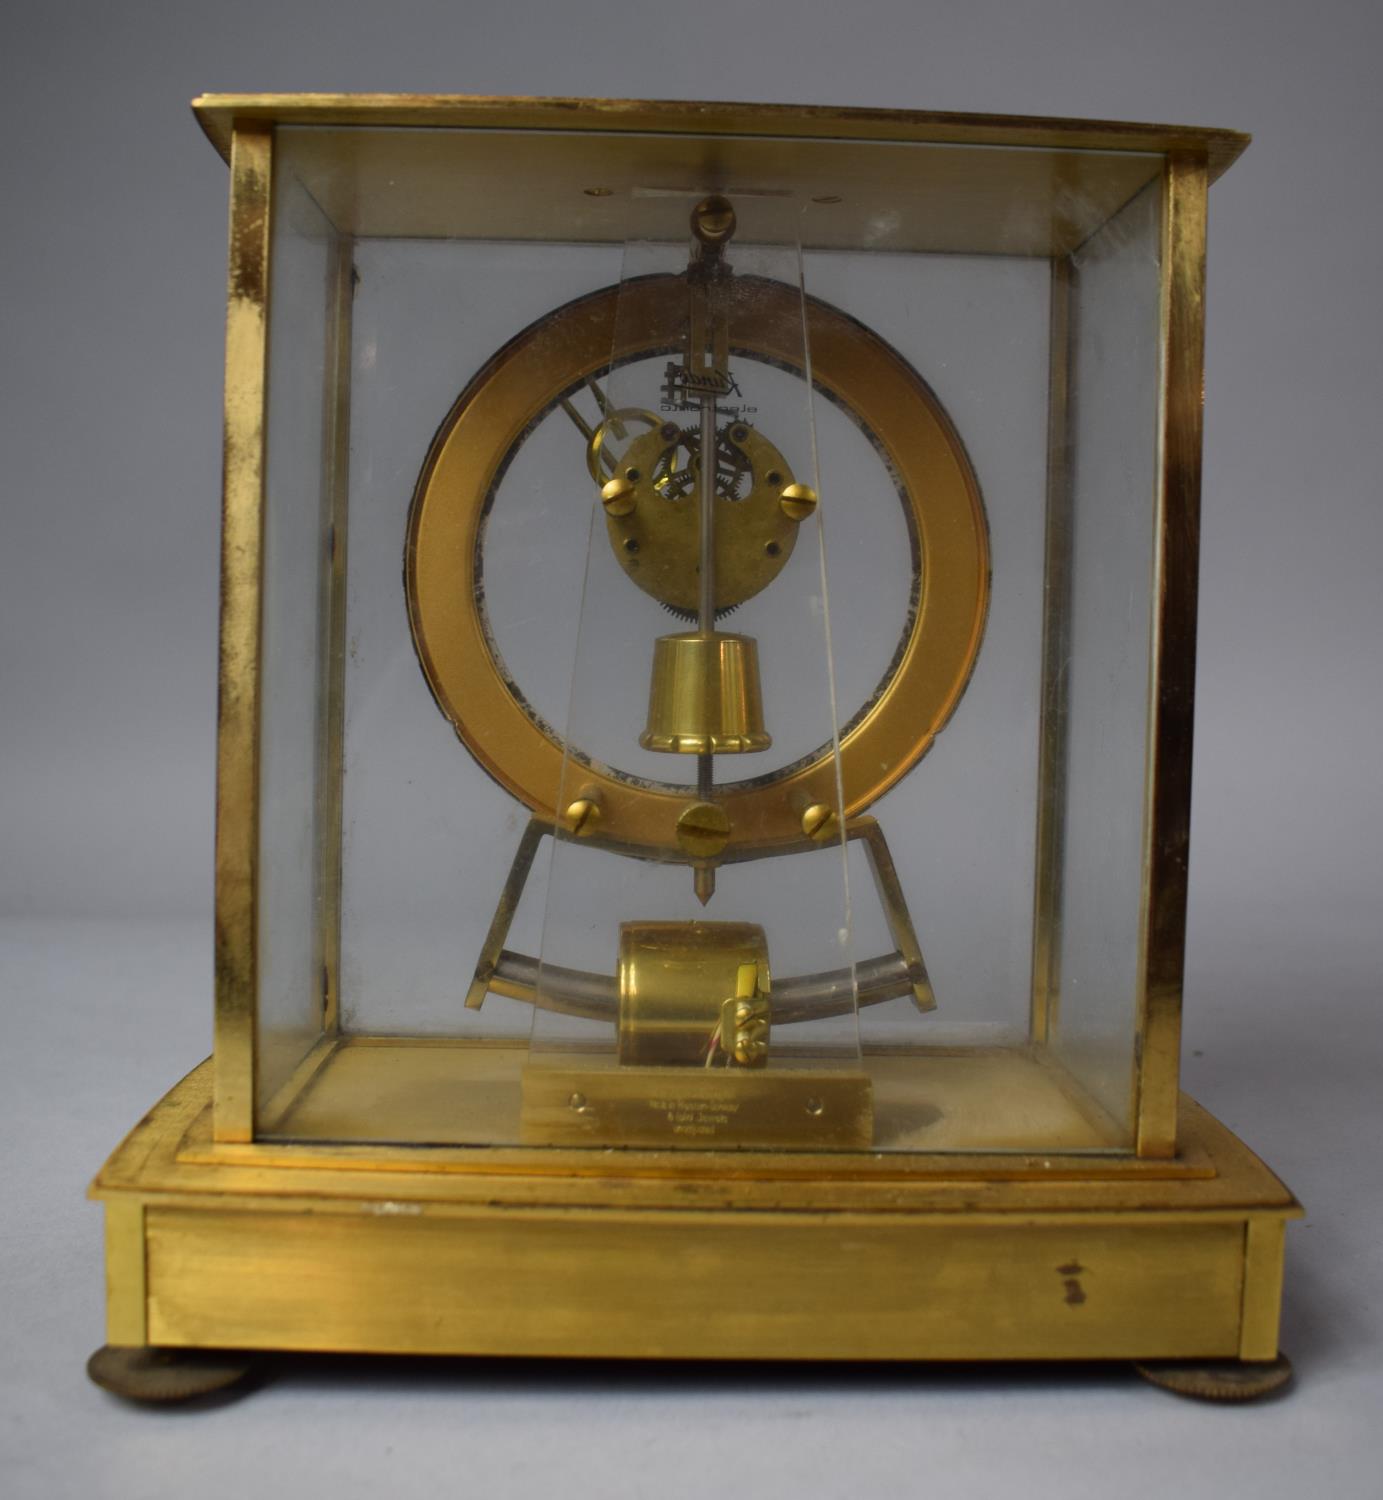 A Mid 20th Century Kundo Electronic Clock by Kieninger and Obergfell, 19.5cm High - Image 2 of 2